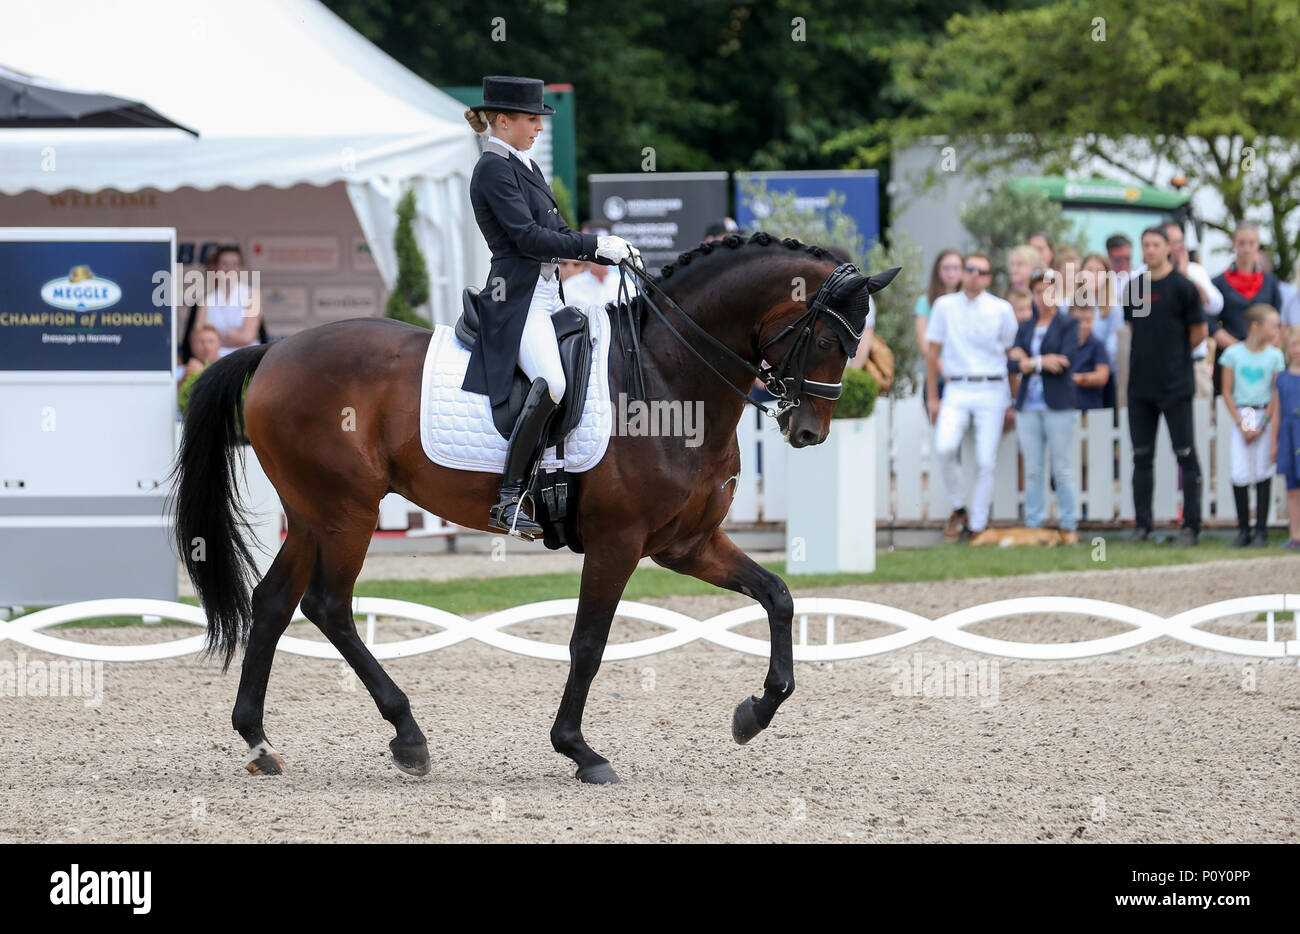 10 June 2018, Balve, Germany: Nina Neuer, equestrian athlete coincidentally married to soccer national team goalkeeper Manuel Neuer competes in the Grand Prix U25 with horse Don Darius. Photo: Friso Gentsch/dpa Stock Photo